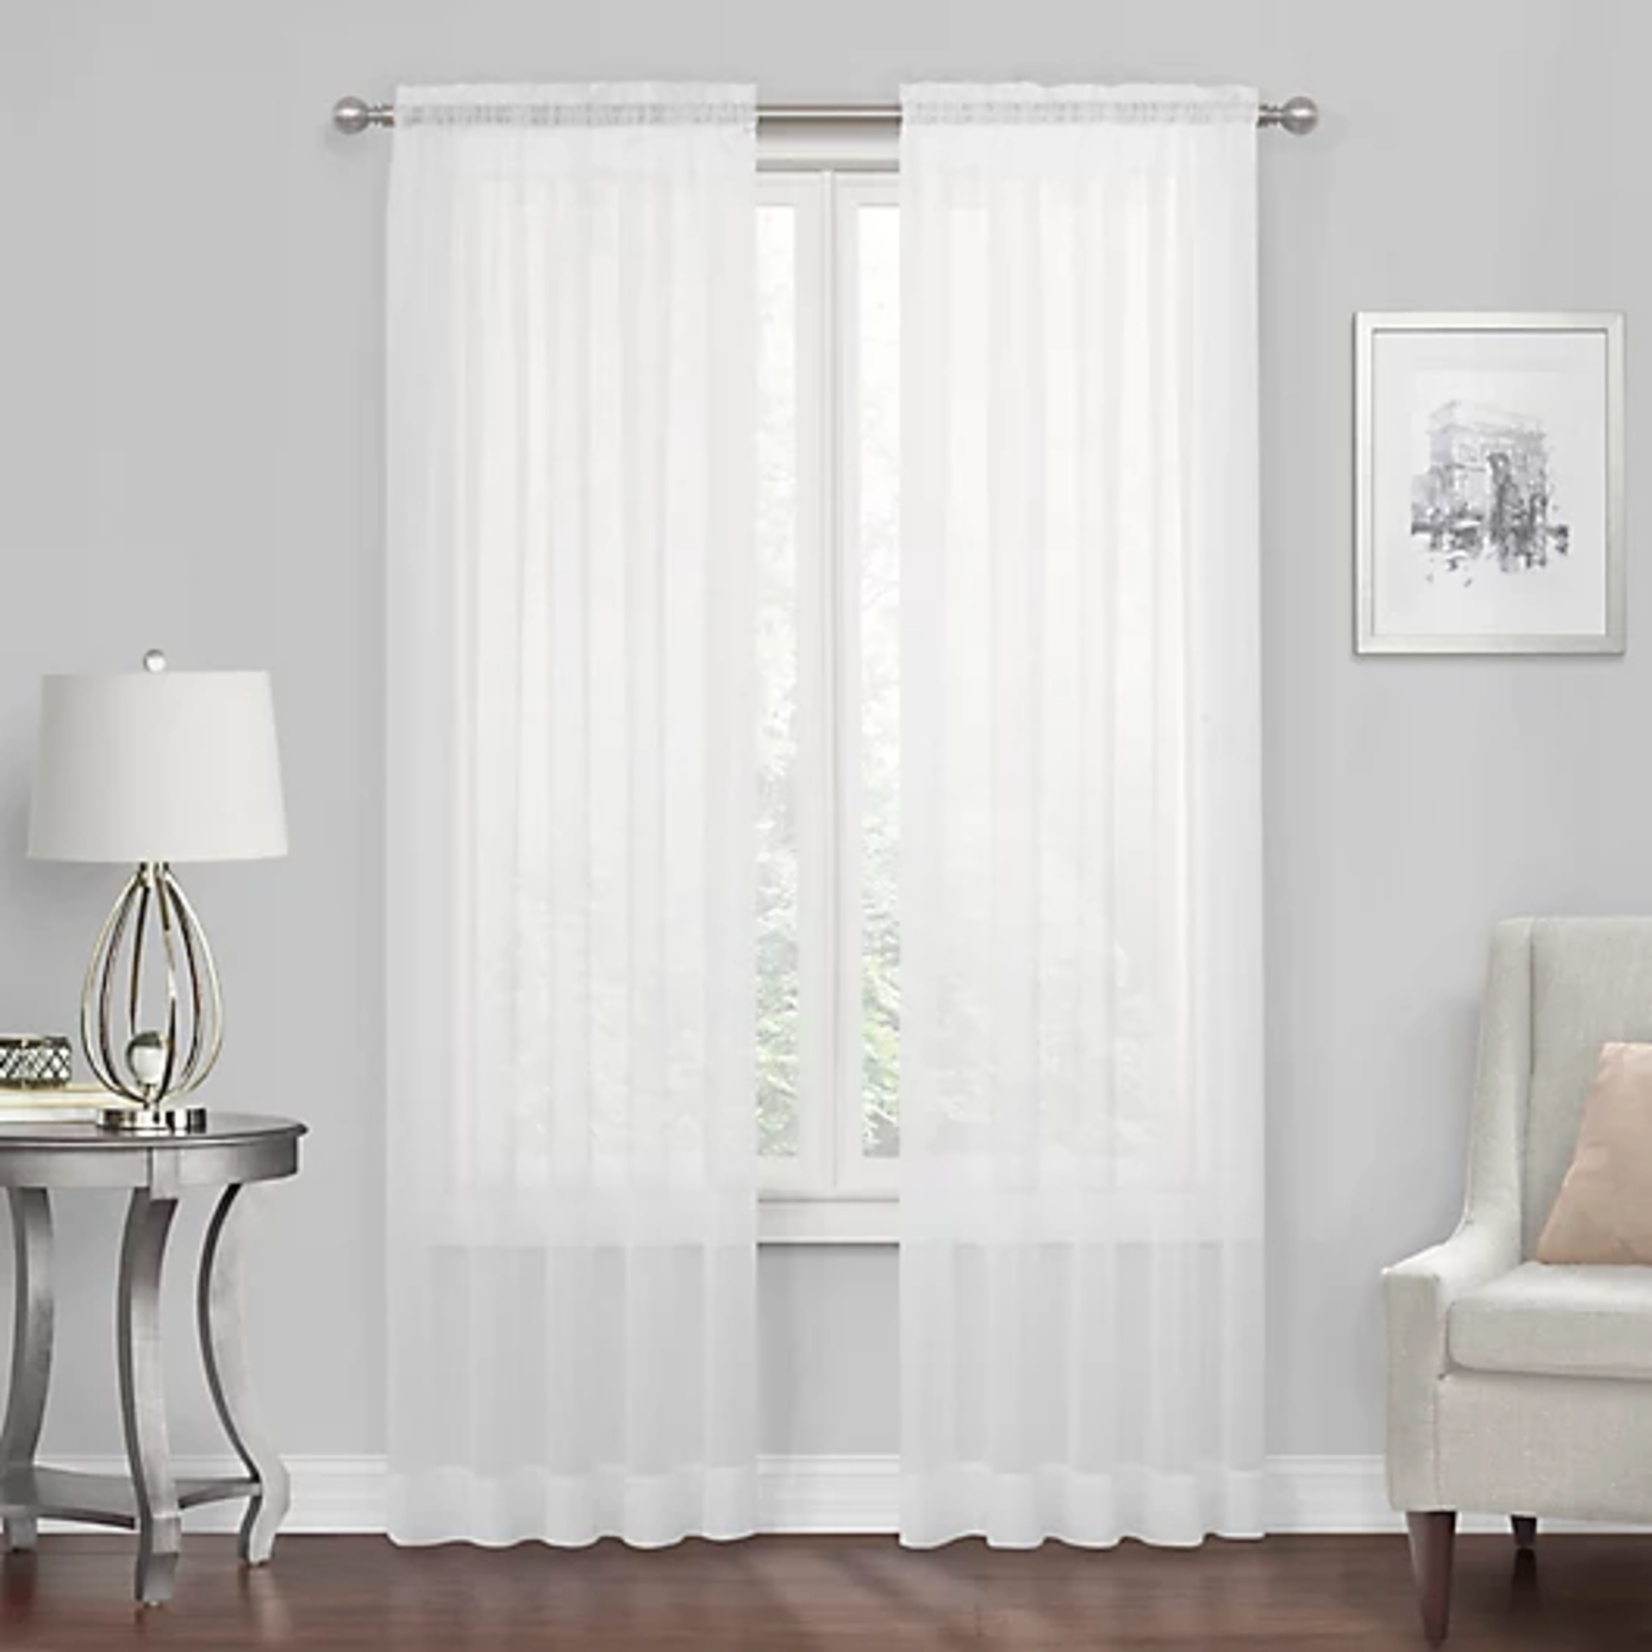 Simply Essential | Voile Rod Pocket Sheer Window Curtain Panel 84" -White (Single)